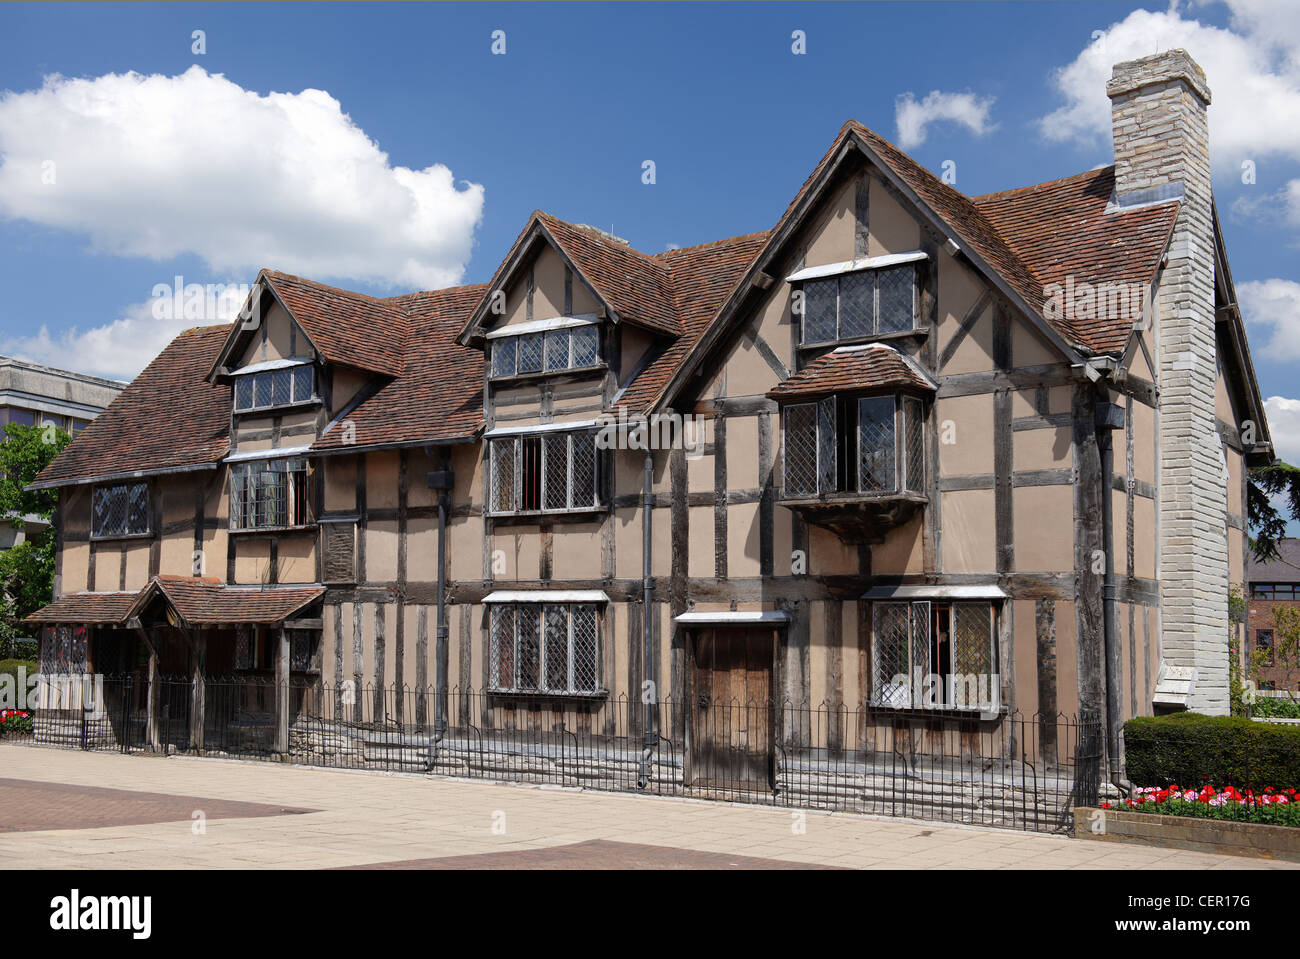 William Shakespeare's Birthplace and Garden in Henley Street, the most famous and most visited literary landmark in Britain. Stock Photo